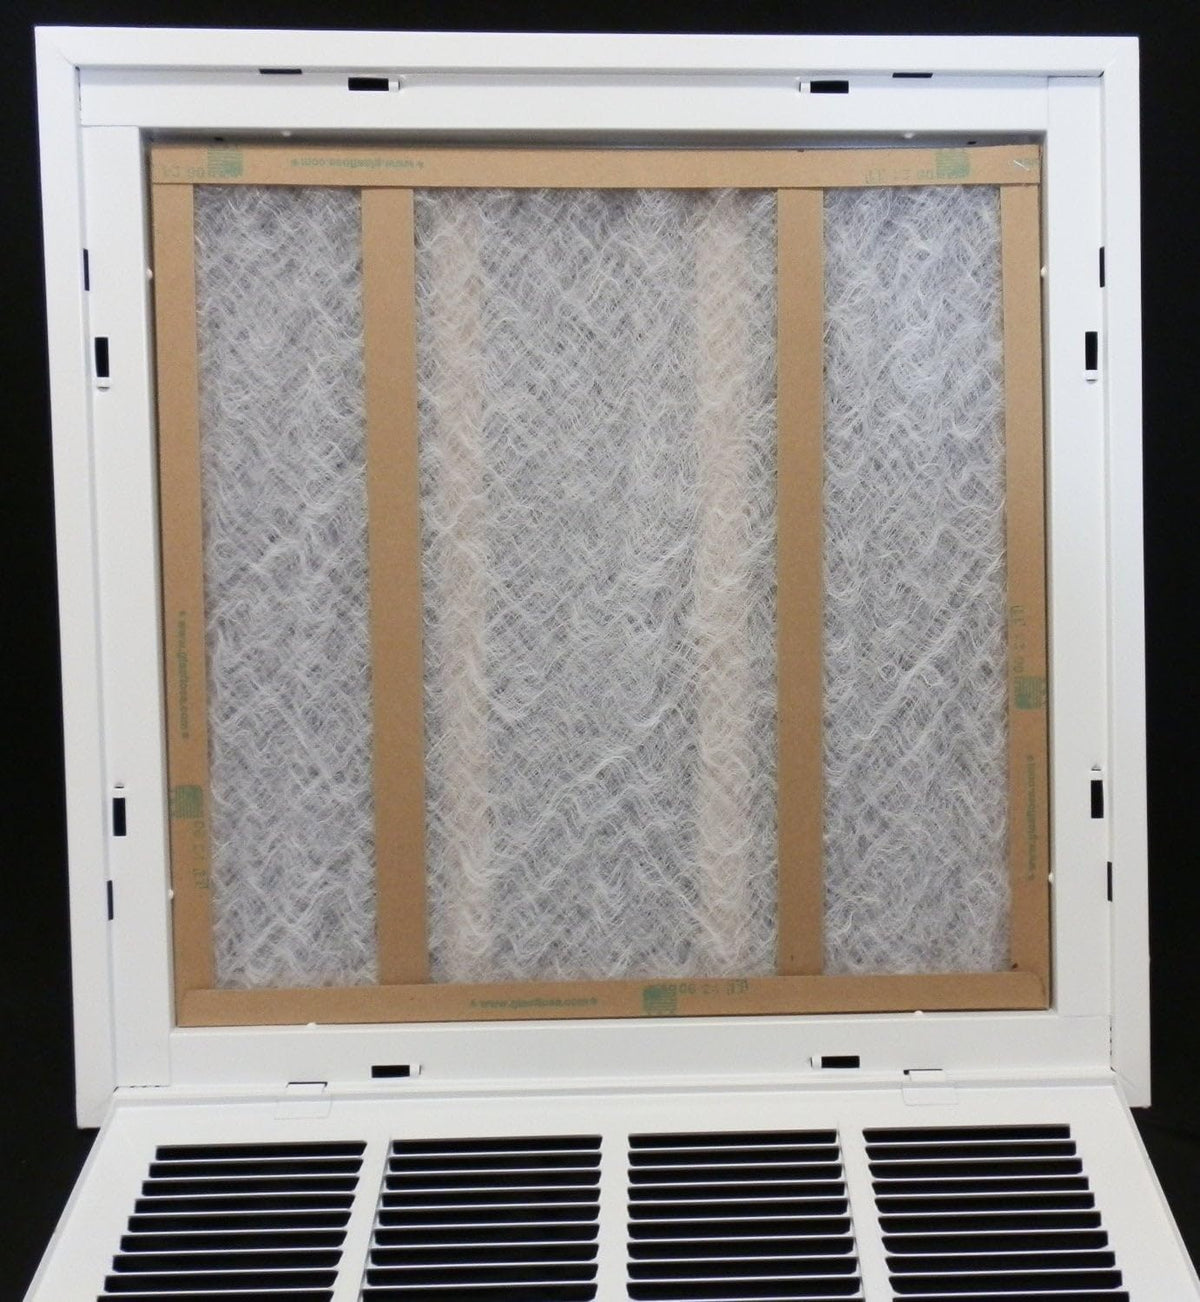 32&quot; X 6&quot; Steel Return Air Filter Grille for 1&quot; Filter - Removable Frame - [Outer Dimensions: 34 5/8&quot; X 8 5/8&quot;]